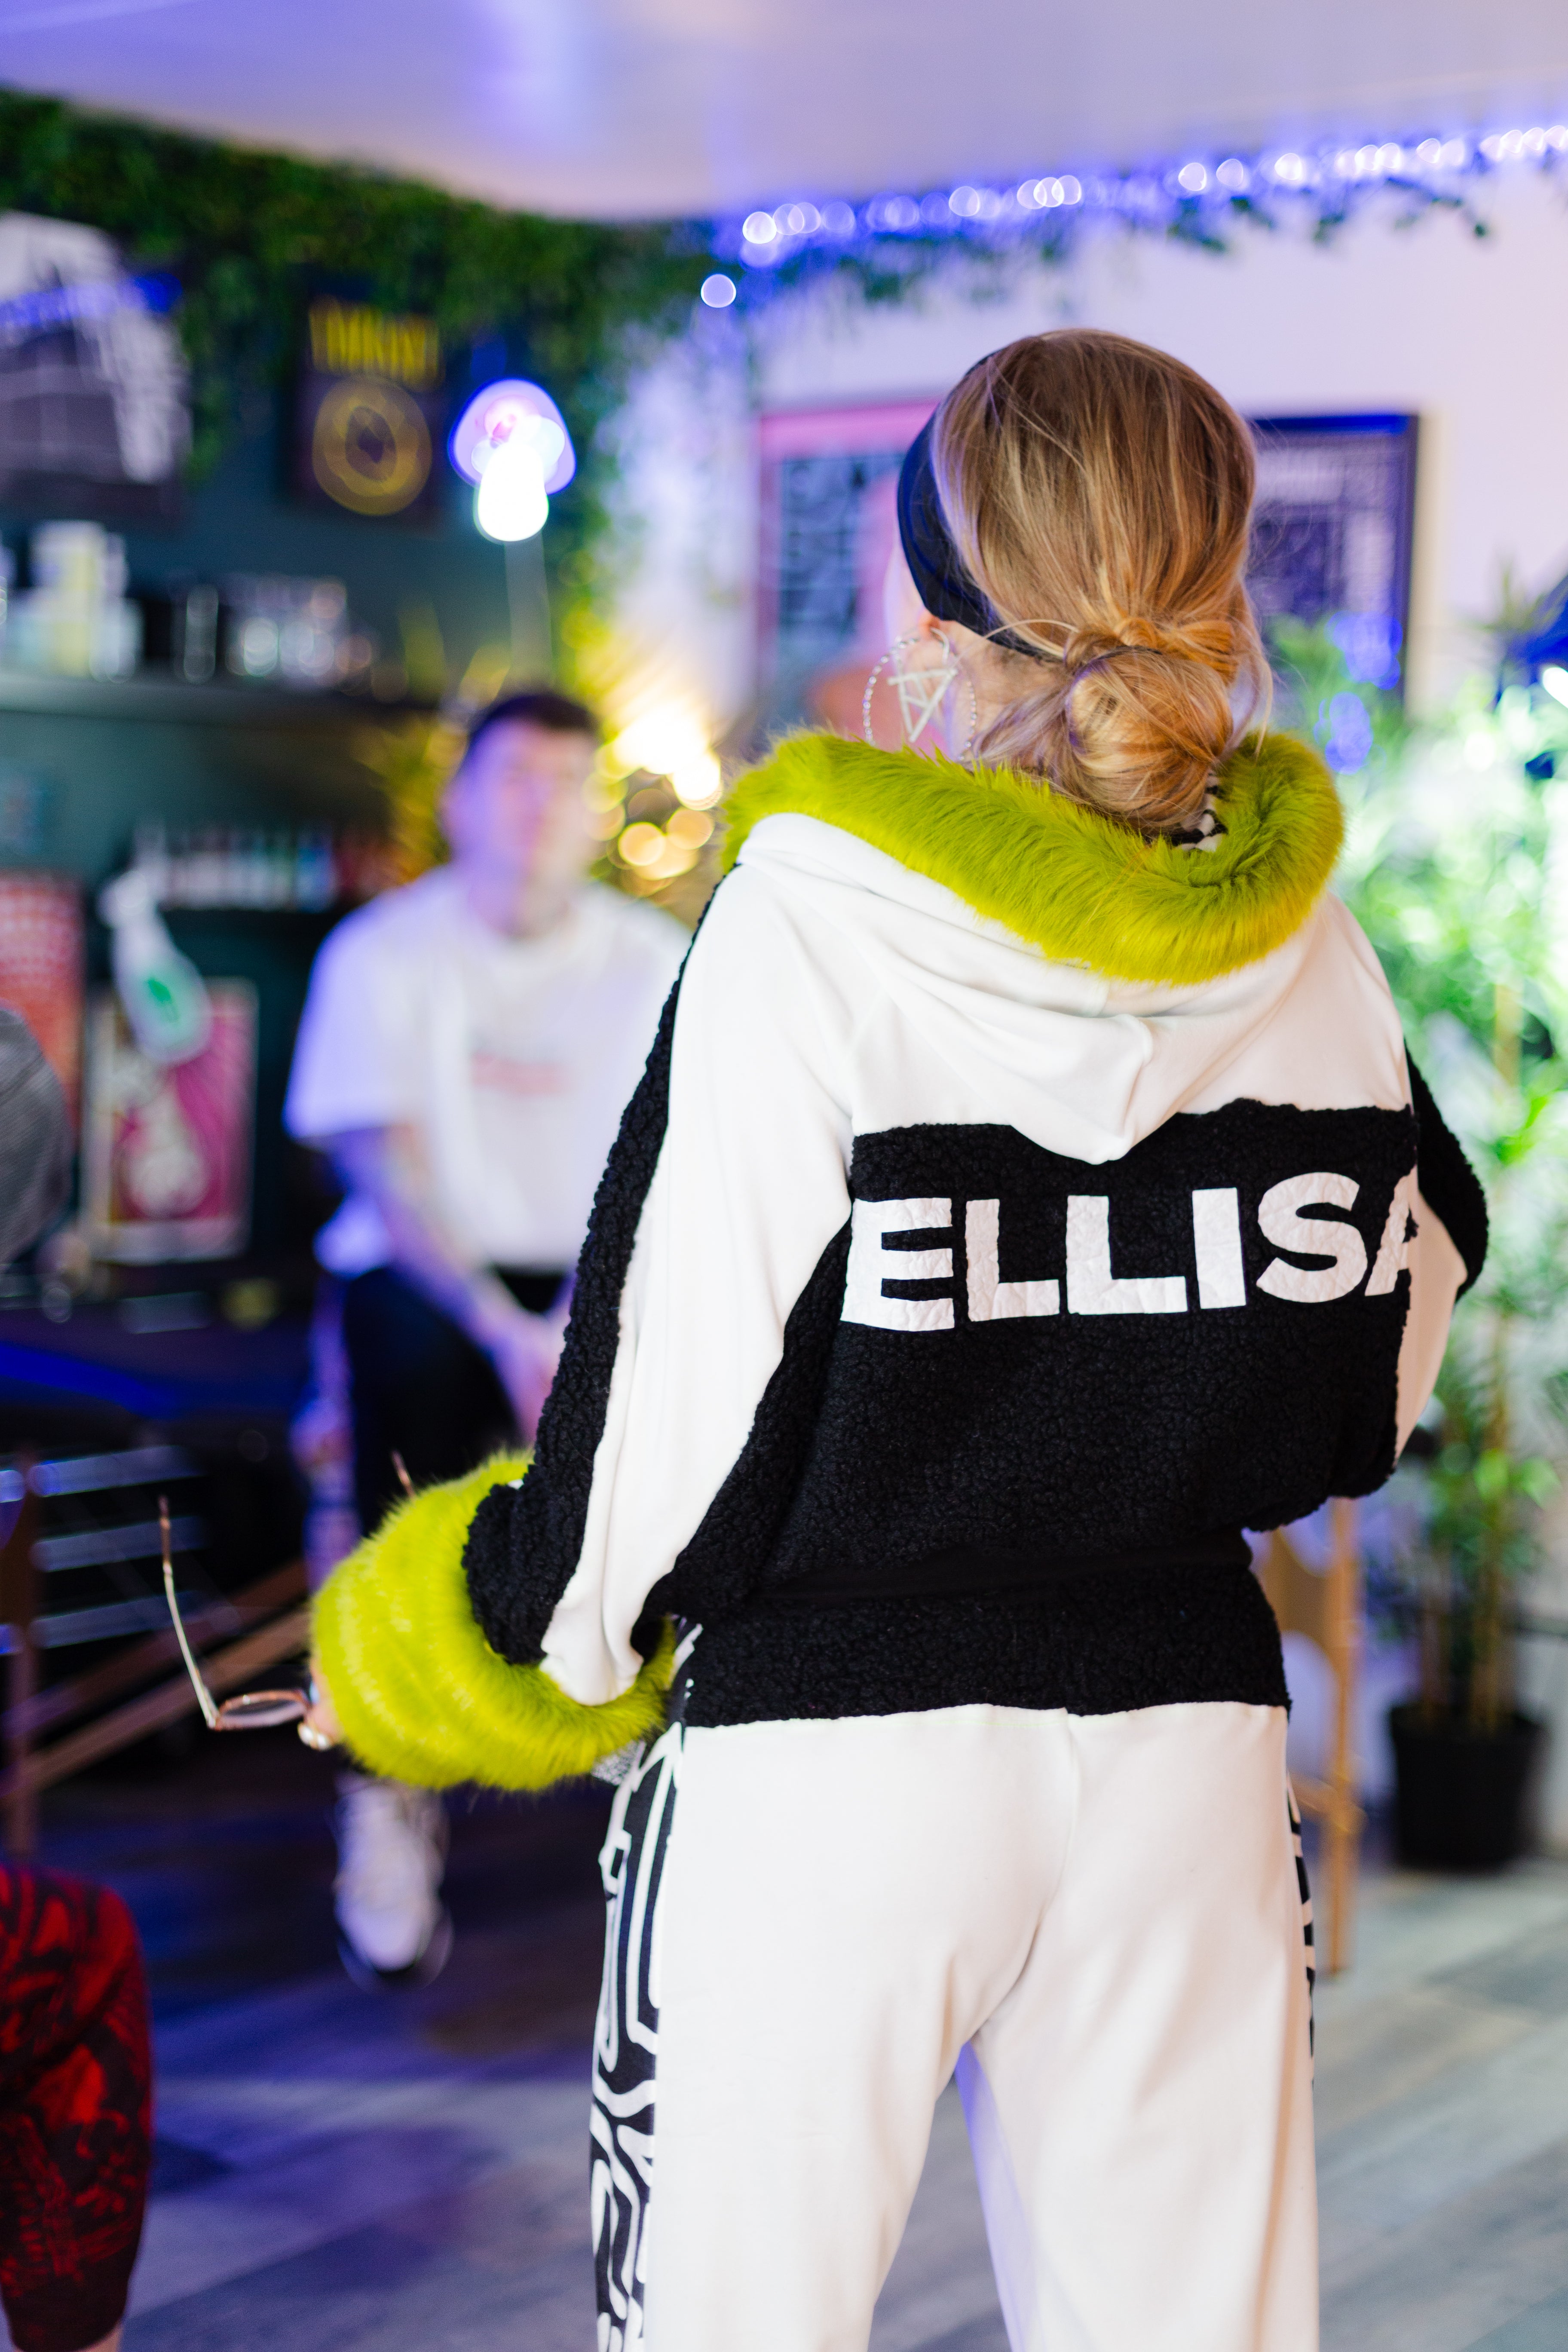 Bellisa X White and Black Velour Cropped Hoodie with Lime Green Faux Fur Cuffs and Hood. Unique summer fashion hoodie  monogram logo detail